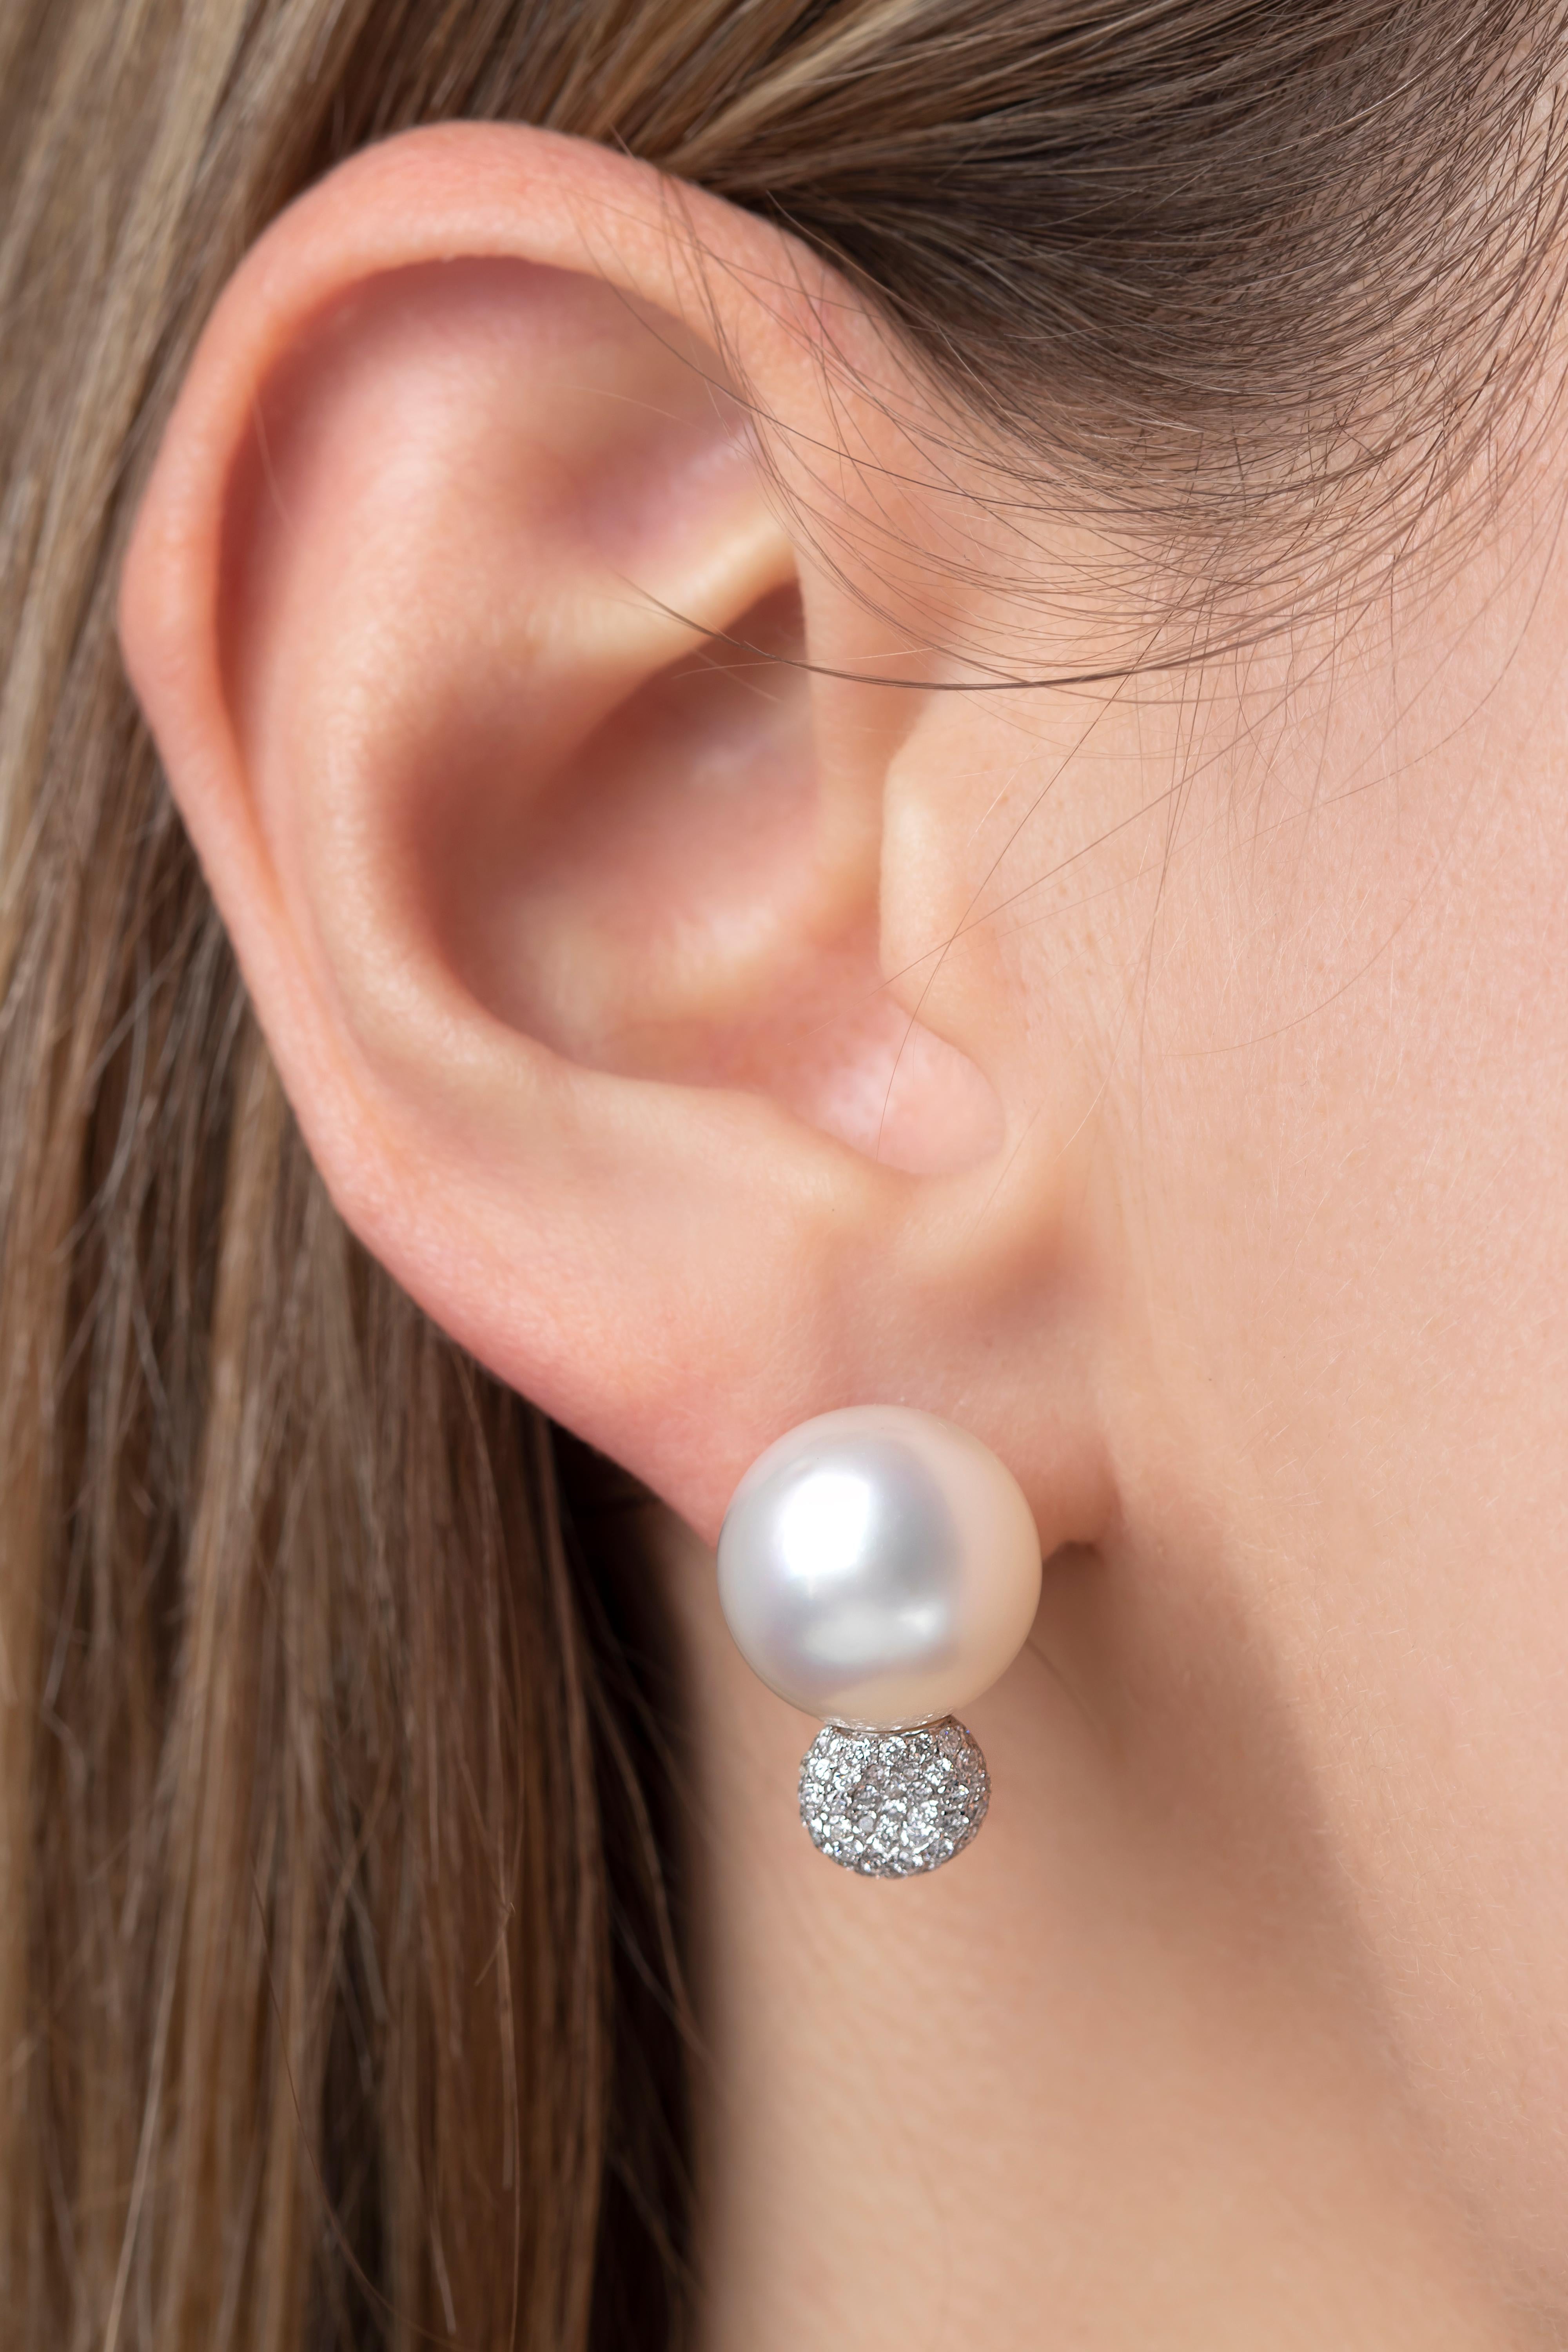 These elegant earrings by Yoko London feature lustrous South Sea Pearls atop a cluster of dazzling diamonds. Set in 18 Karat White Gold to enrich the radiance of both the pearls and the diamonds, these earrings utilise a classically beautiful